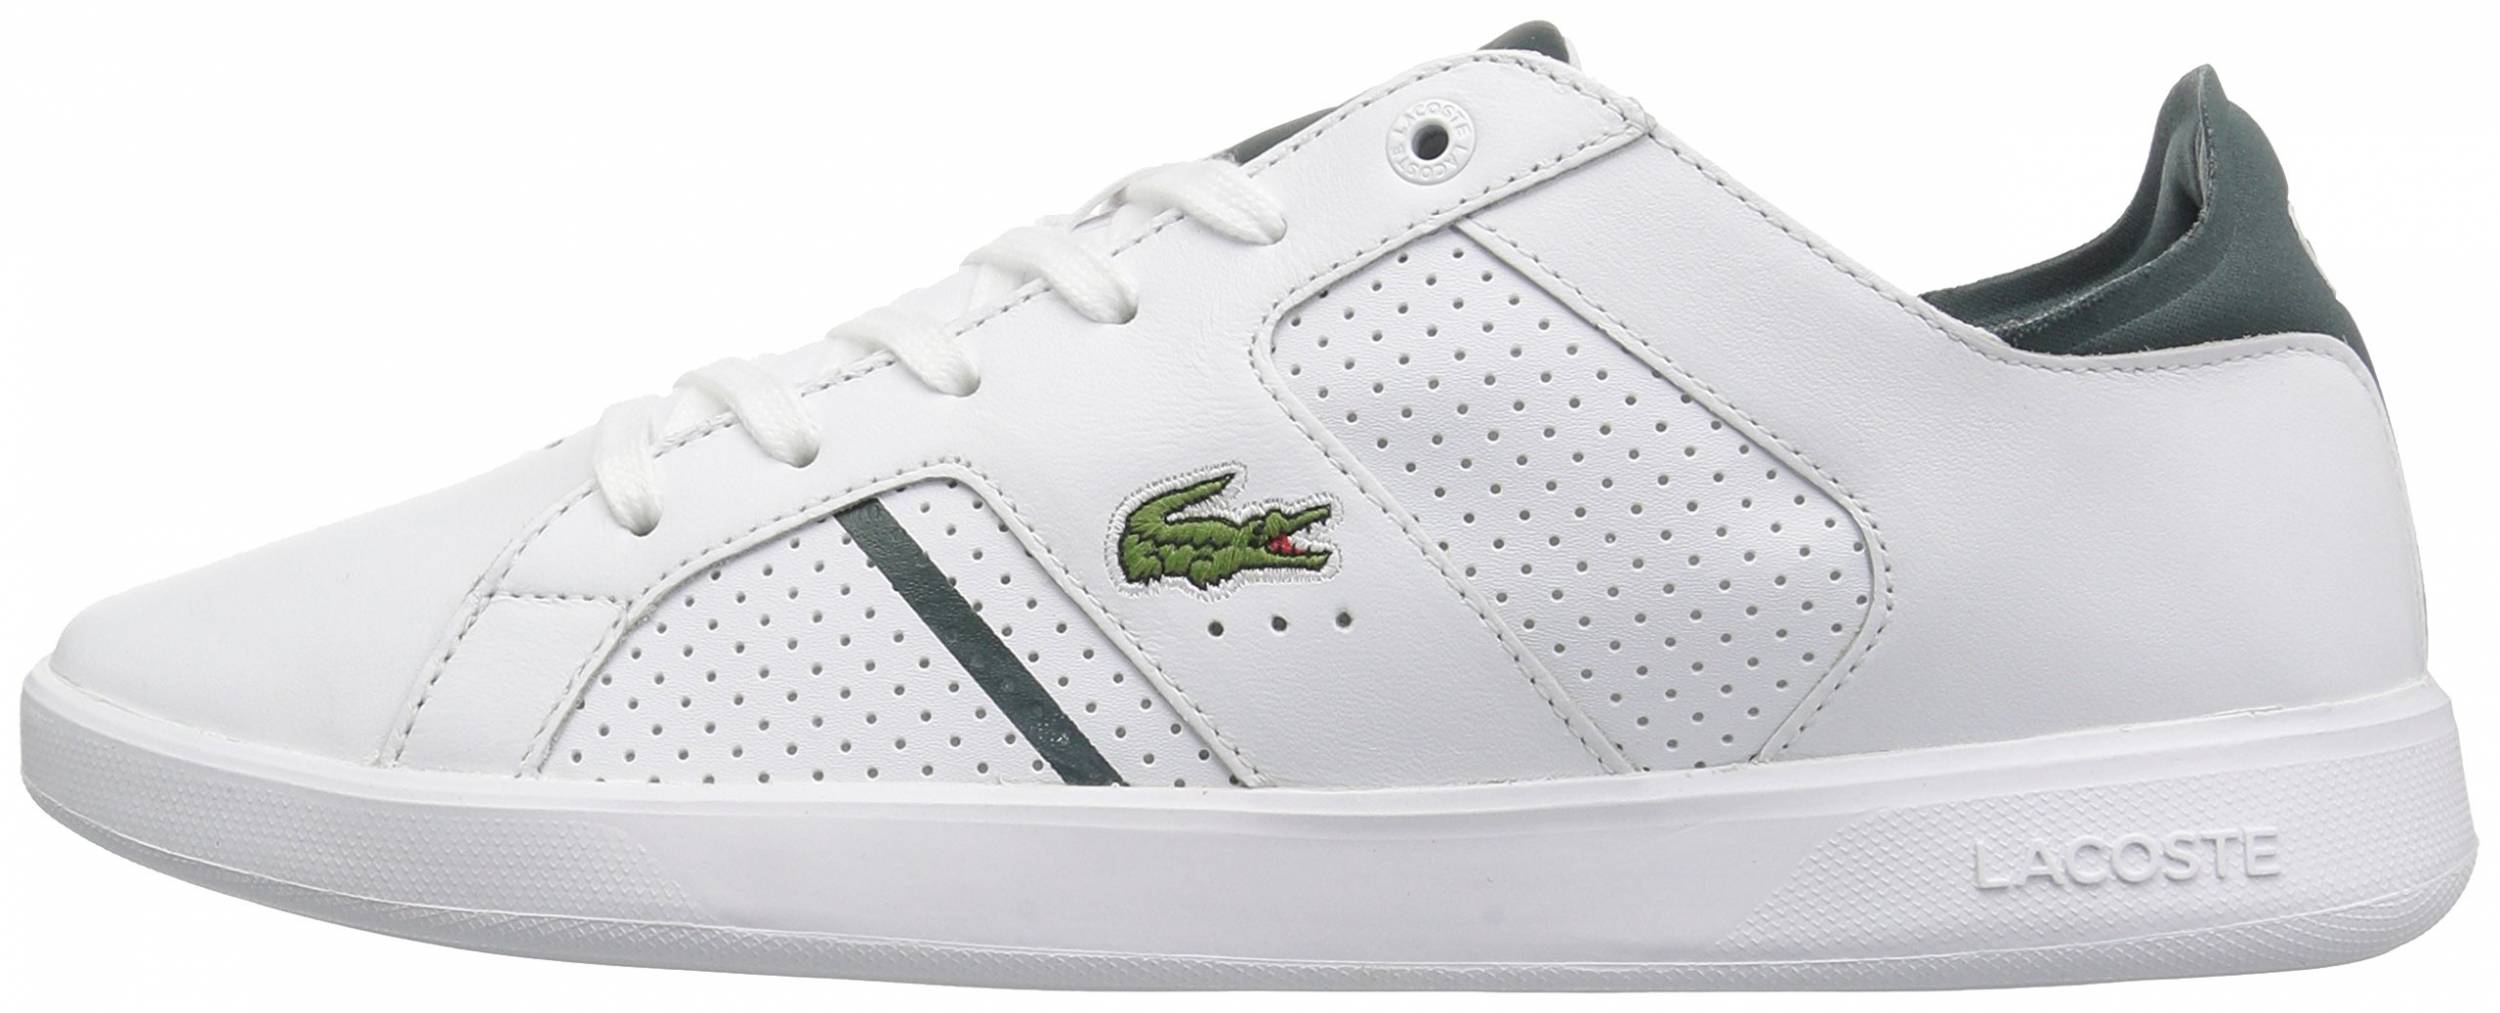 lacoste white leather shoes